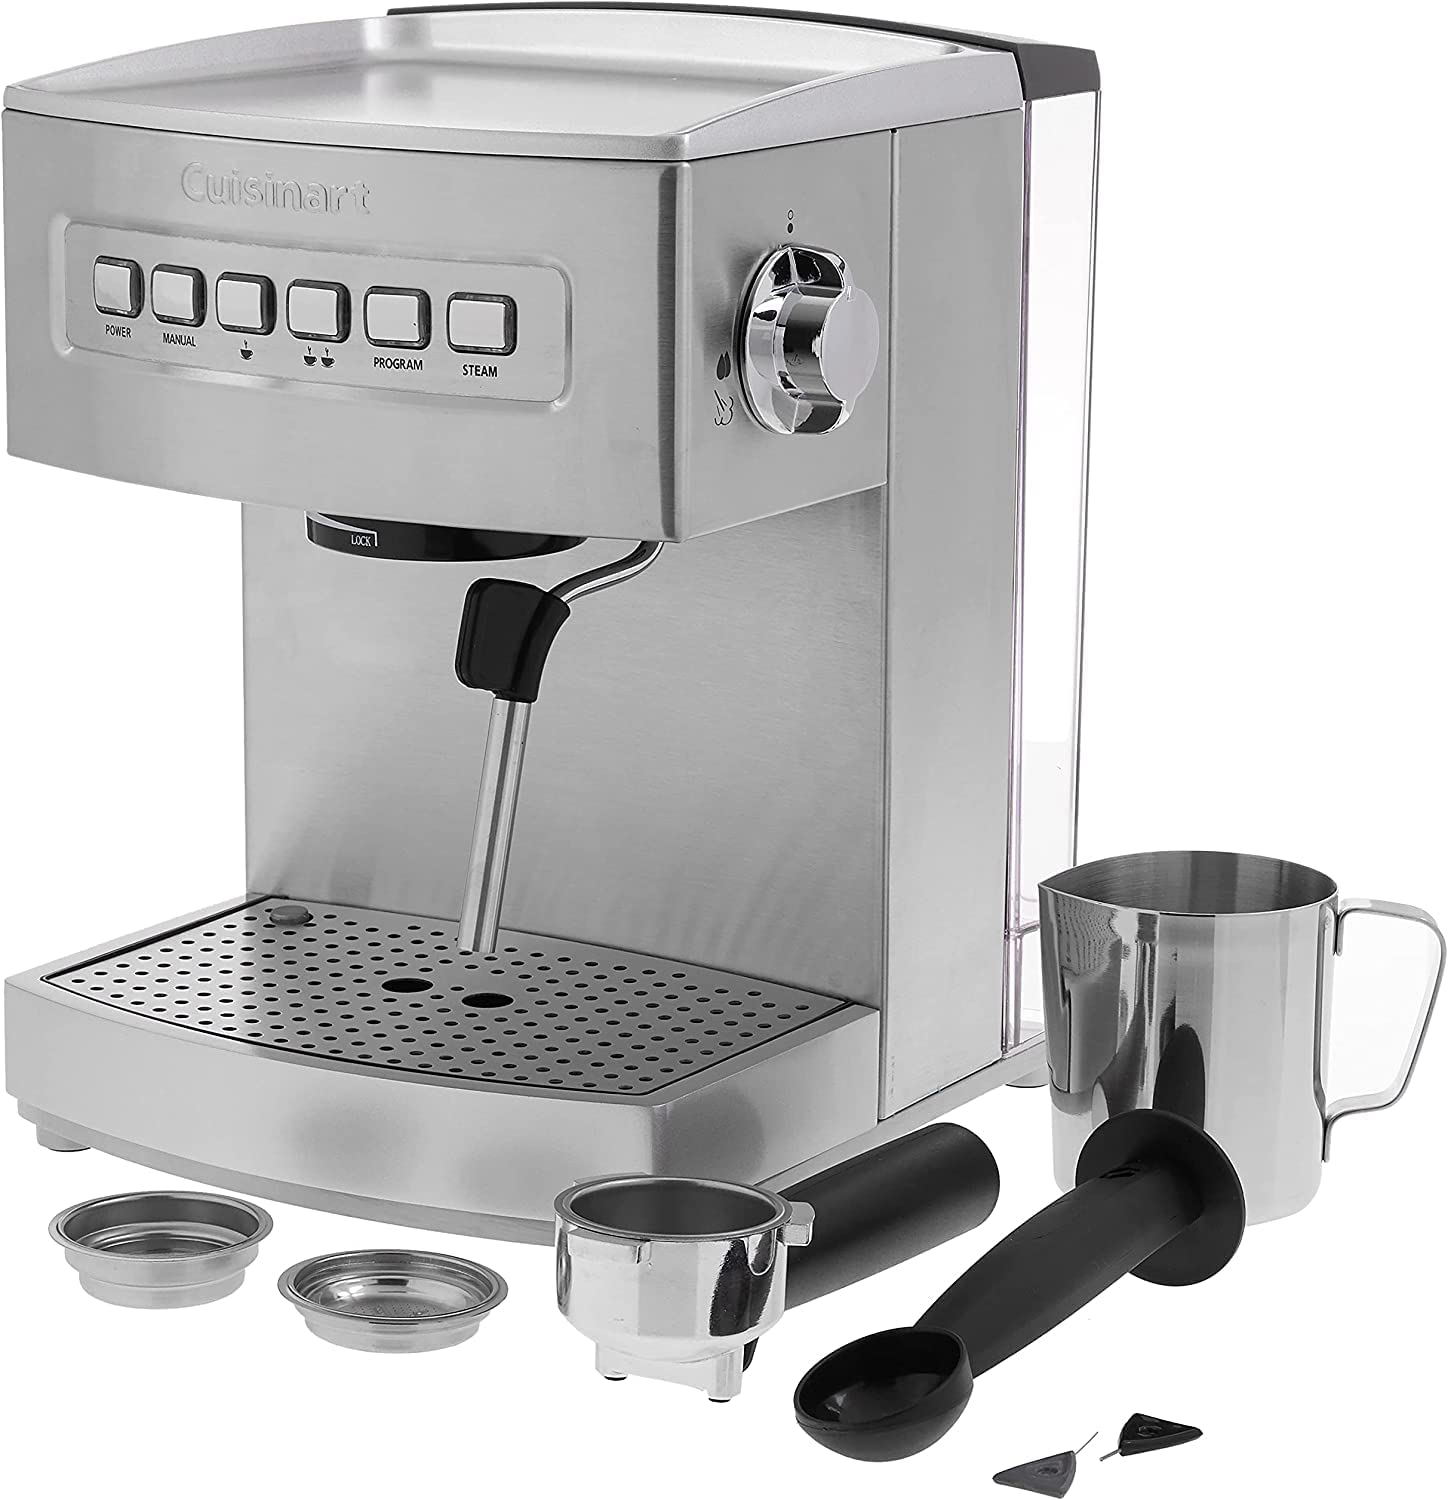  Cuisinart Single Serve + 12 Cup Coffee Maker, Offers 3-Sizes:  6-Ounces, 8-Ounces and 10-Ounces, Stainless Steel, SS-15P1: Home & Kitchen